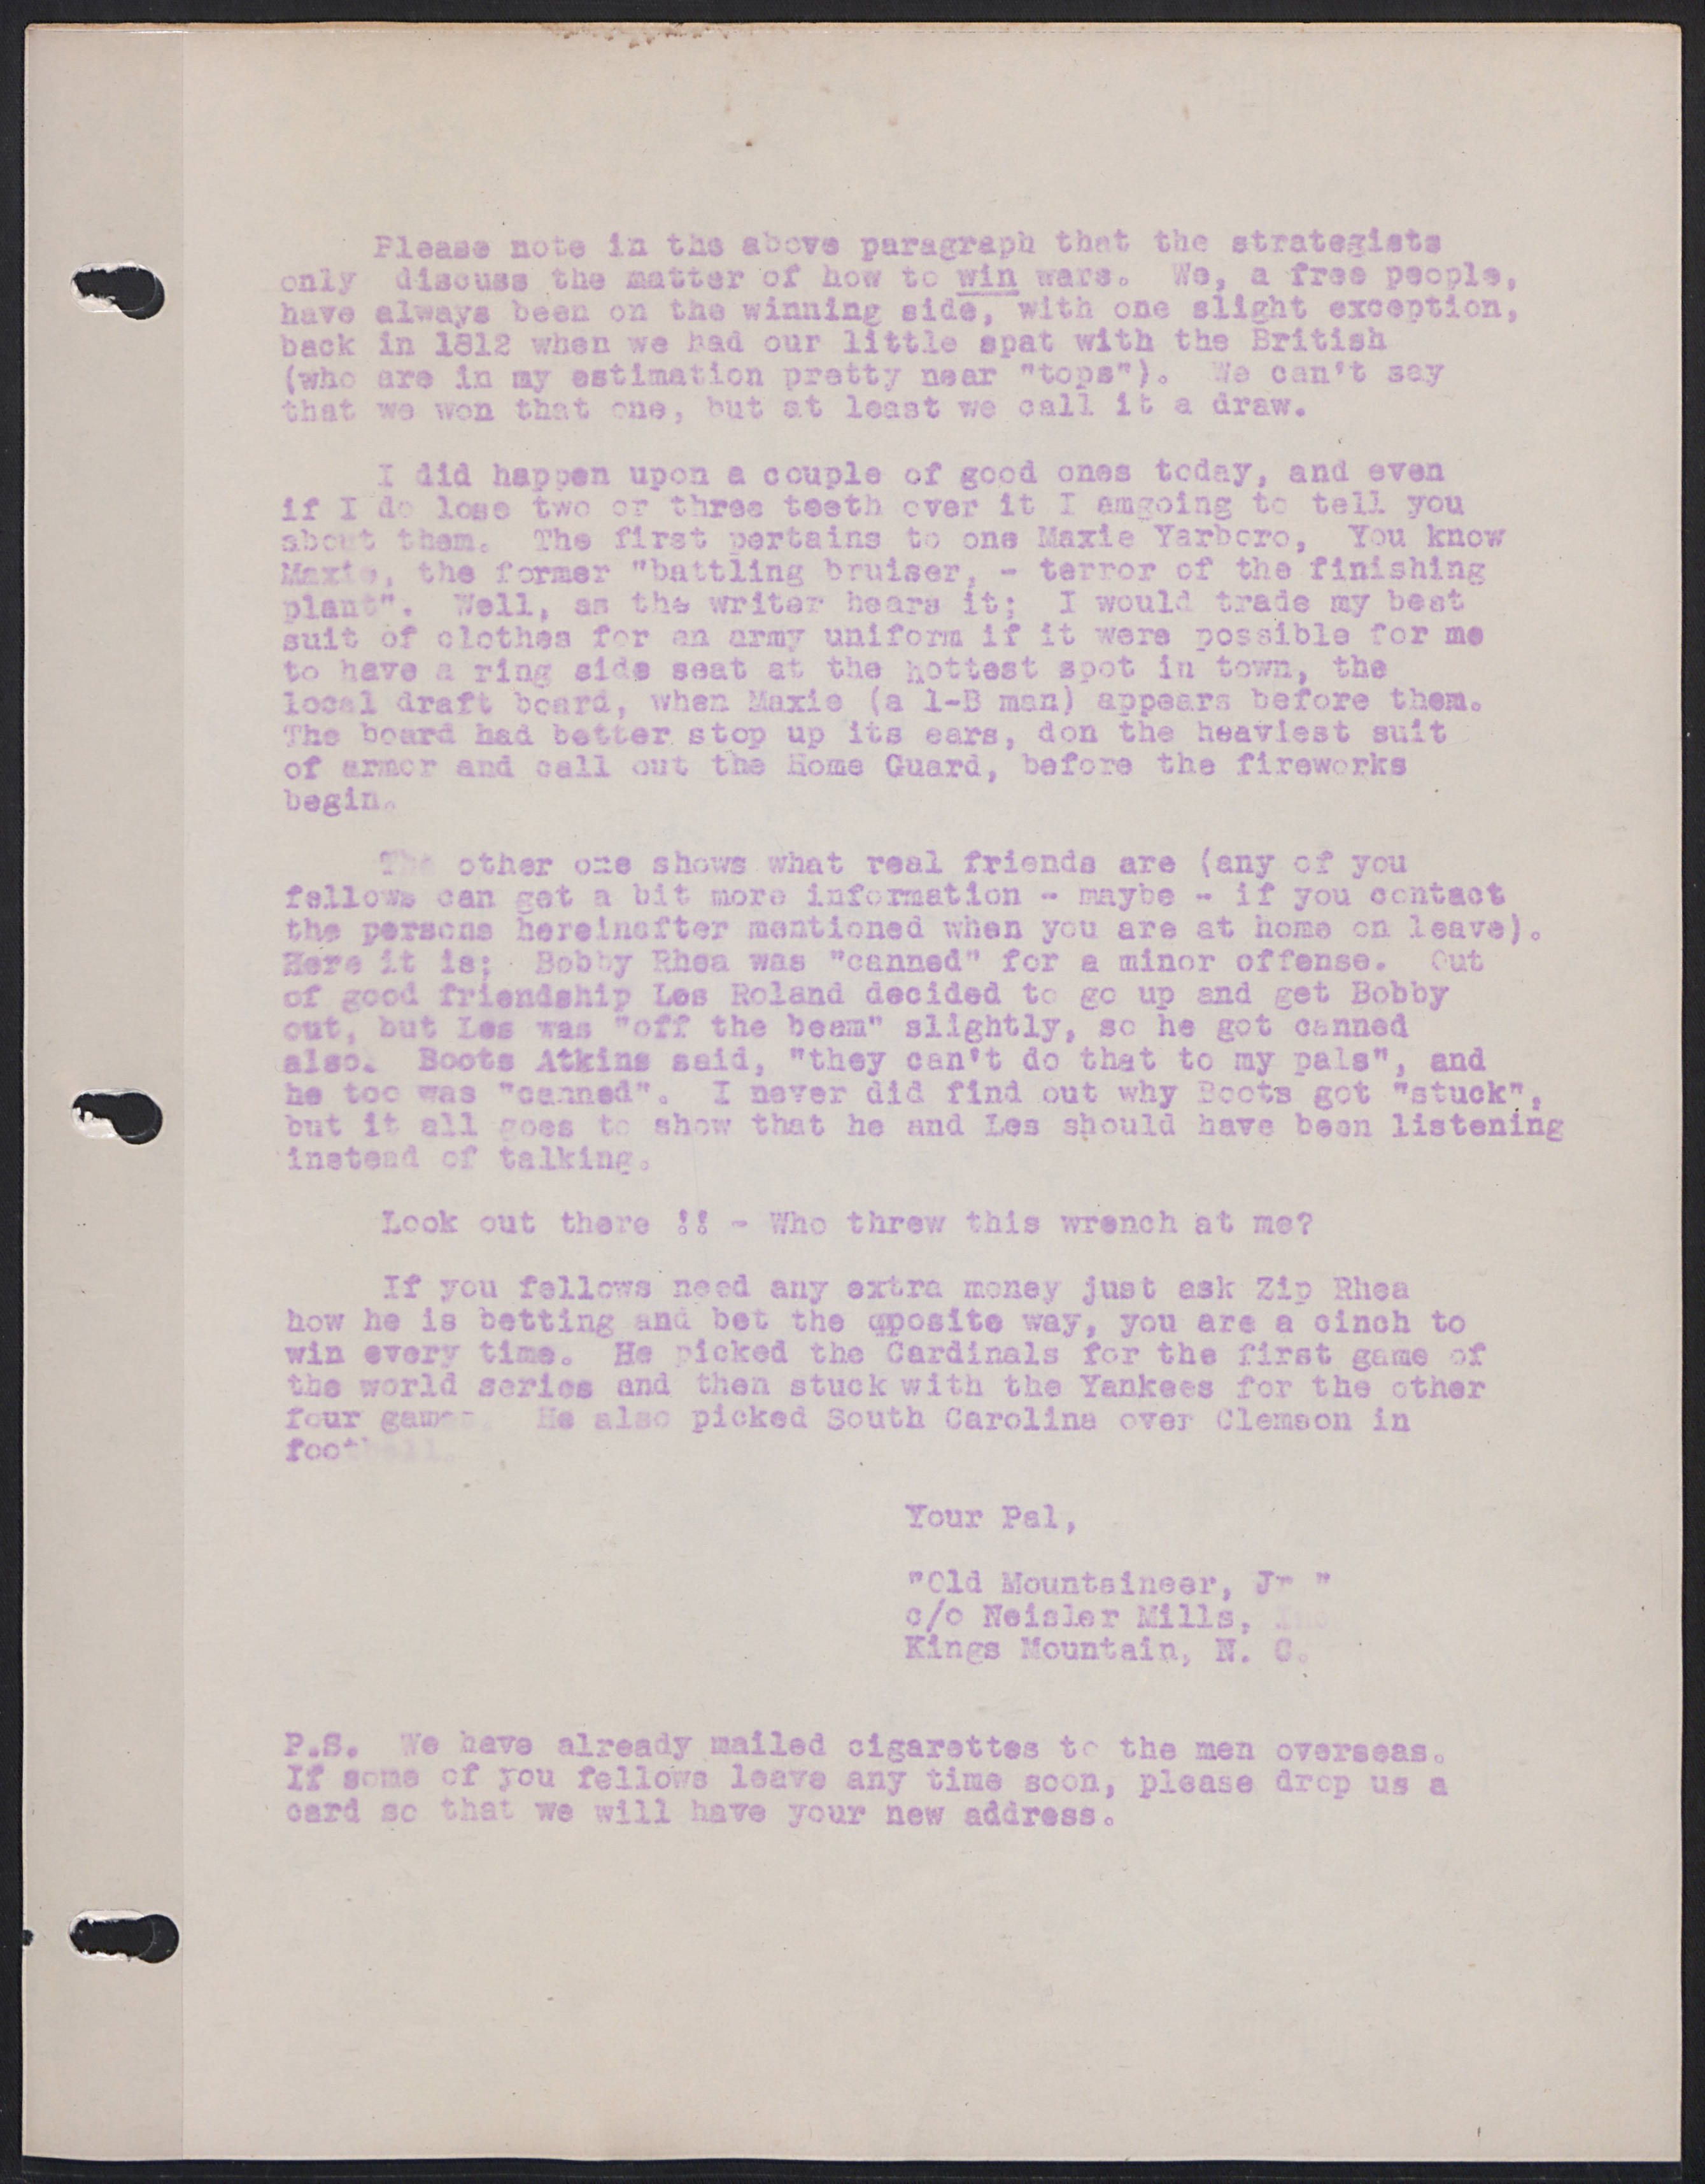 The Old Mountaineer Letters to Servicemen page 15